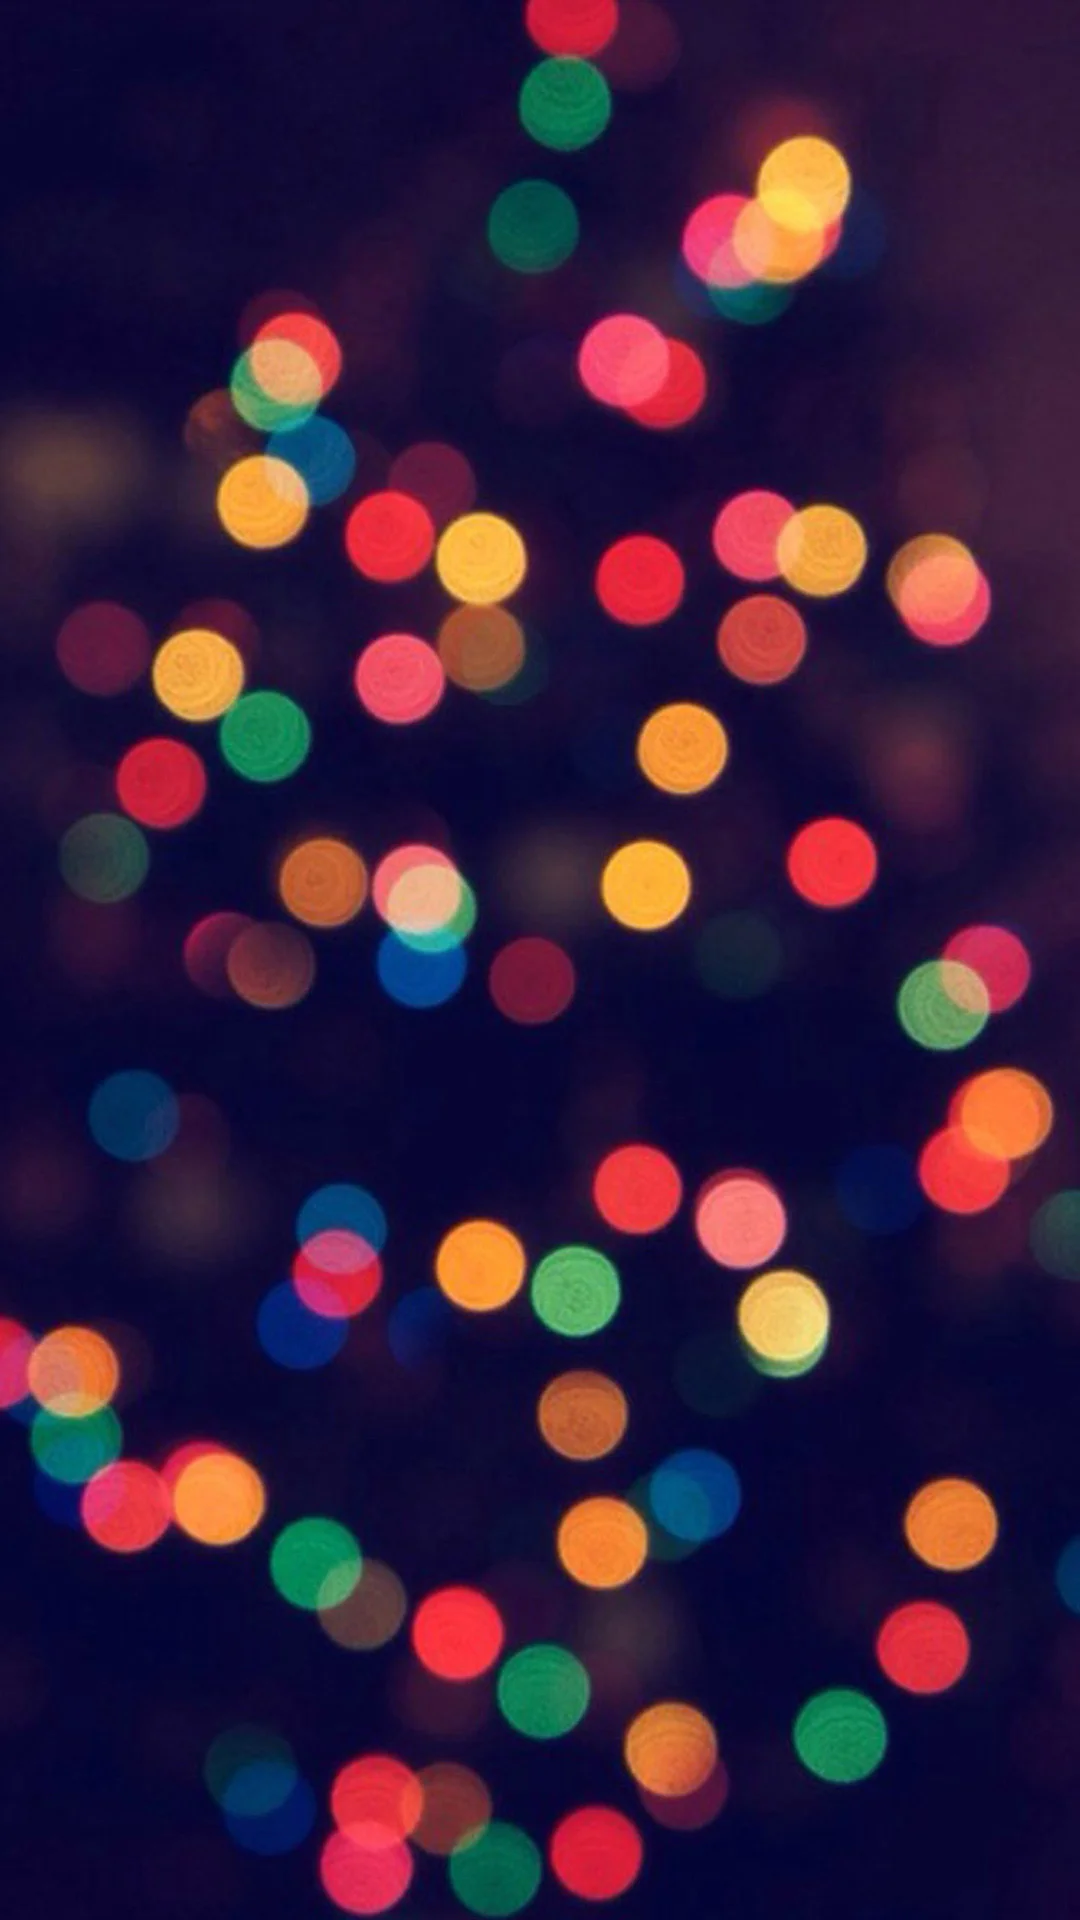 20 Christmas Wallpapers for iPhone and iPhone 6 – iPhoneHeat